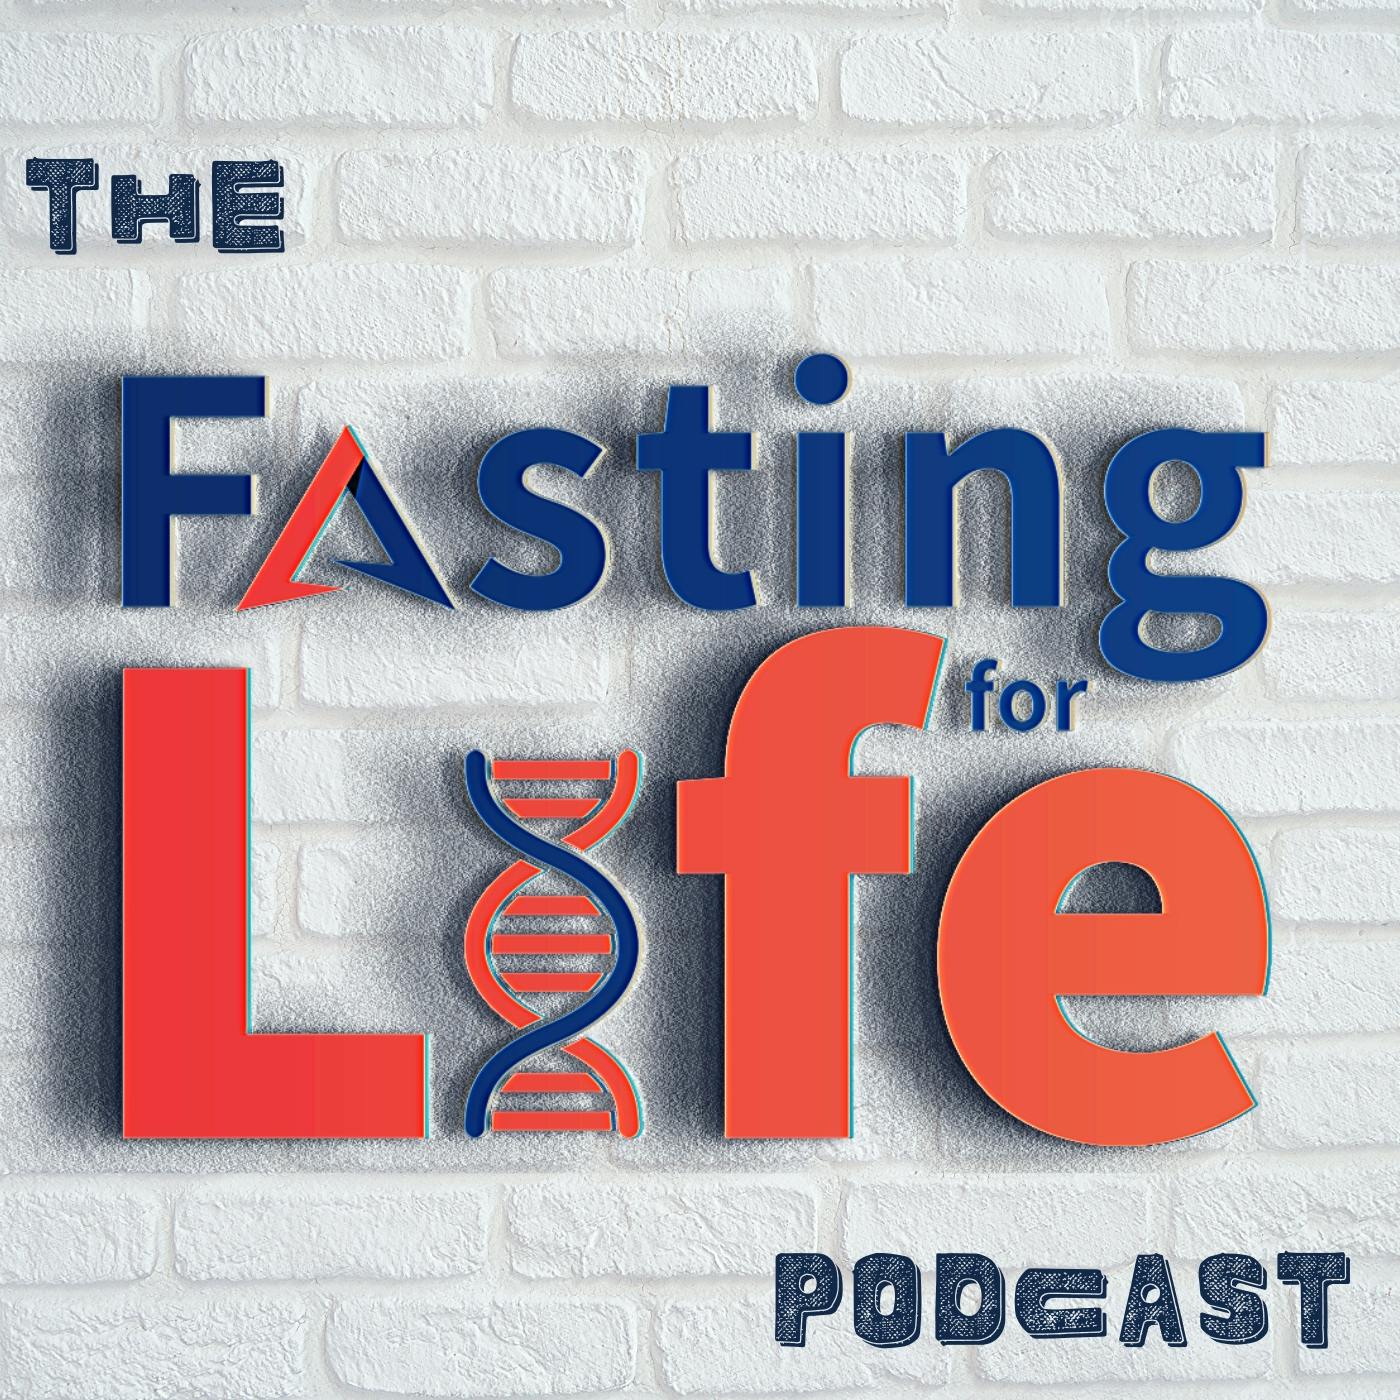 Ep. 72 - Fasting to improve Bloodwork, Triglycerides, Cholesterol, Fatty Liver | Low Fat Myths | ADF to Reverse Non-Alcoholic Fatty Liver Disease, Obesity, & Diabetes | One Meal a Day OMAD Free Interm